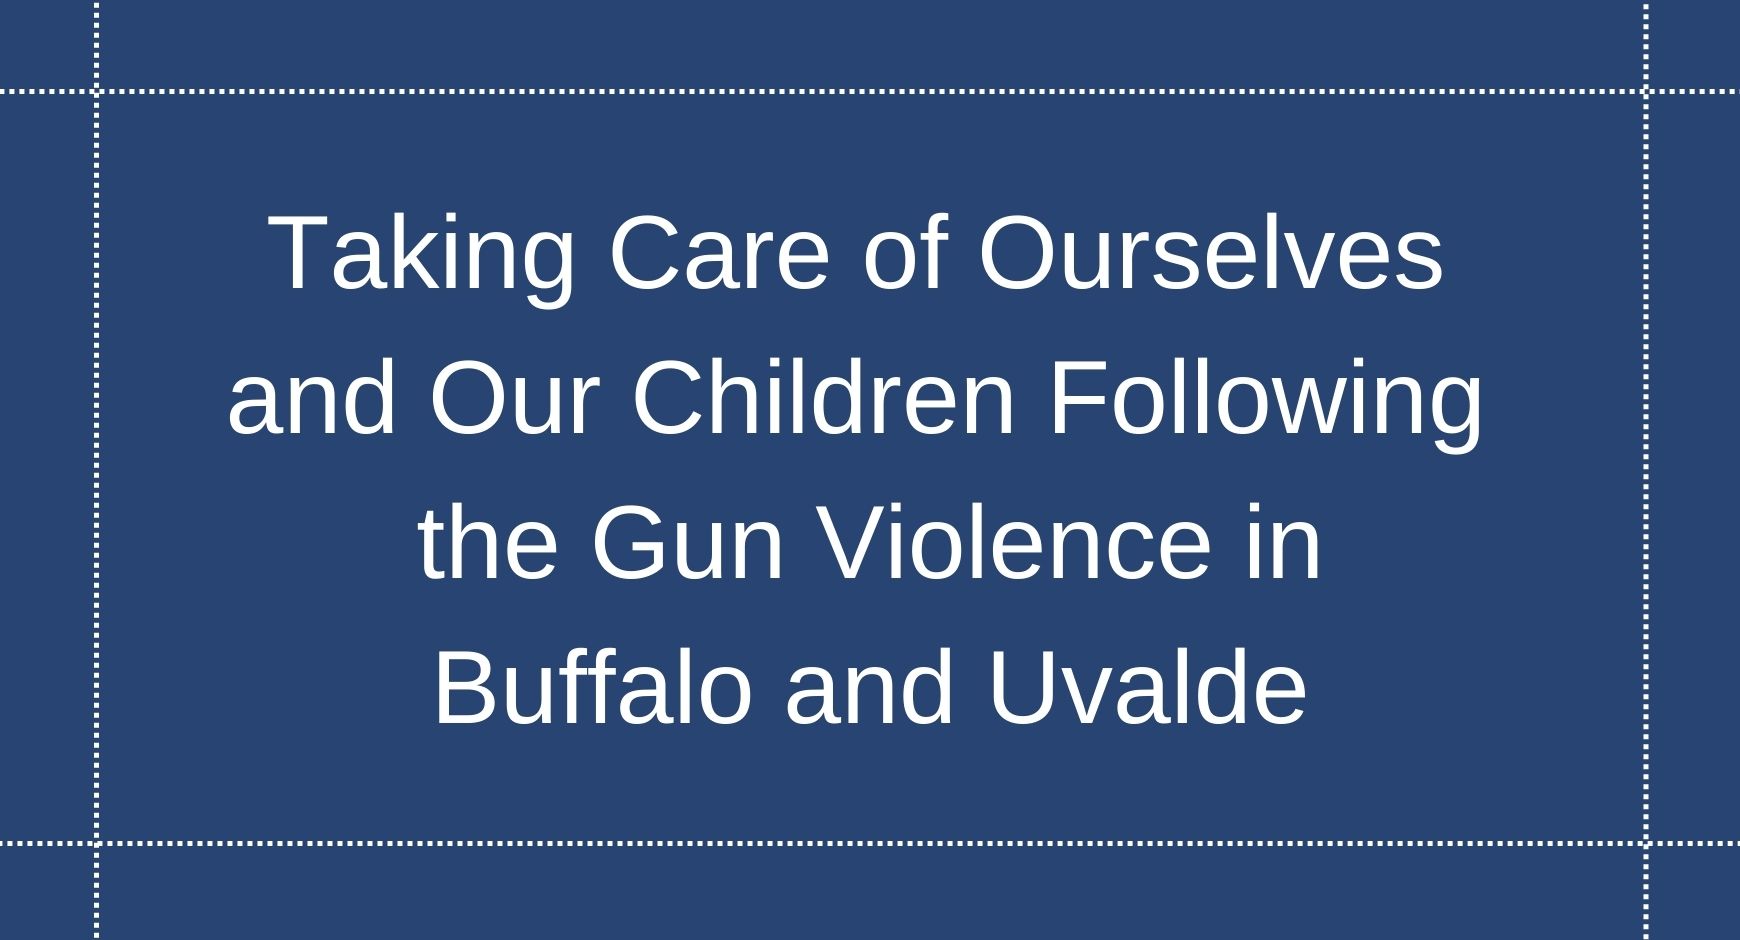 White letters that read "Taking Care of Ourselves and Our Children Following the Gun Violence in Buffalo and Uvalde" against a navy blue background